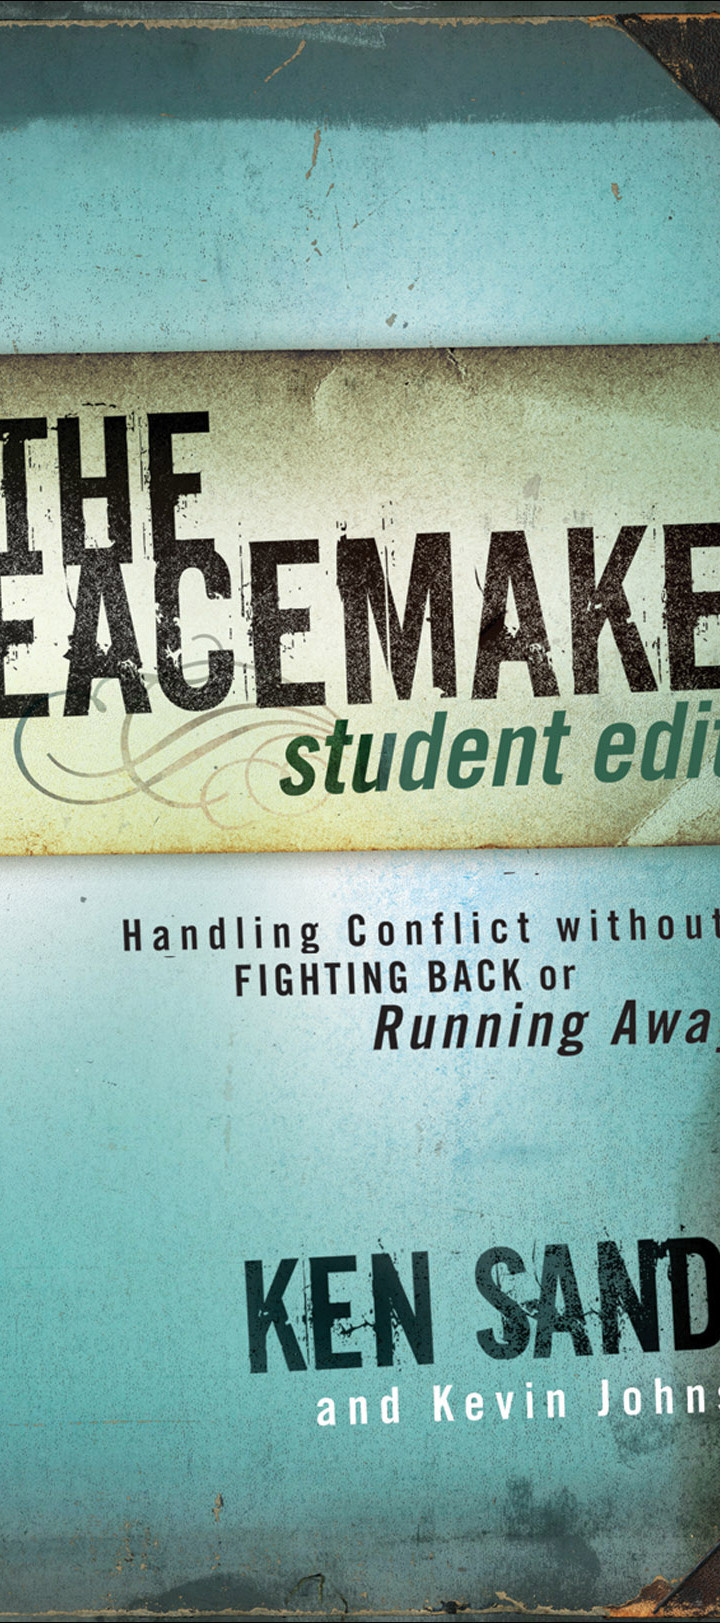 The Peacemaker youth ministry youth culture